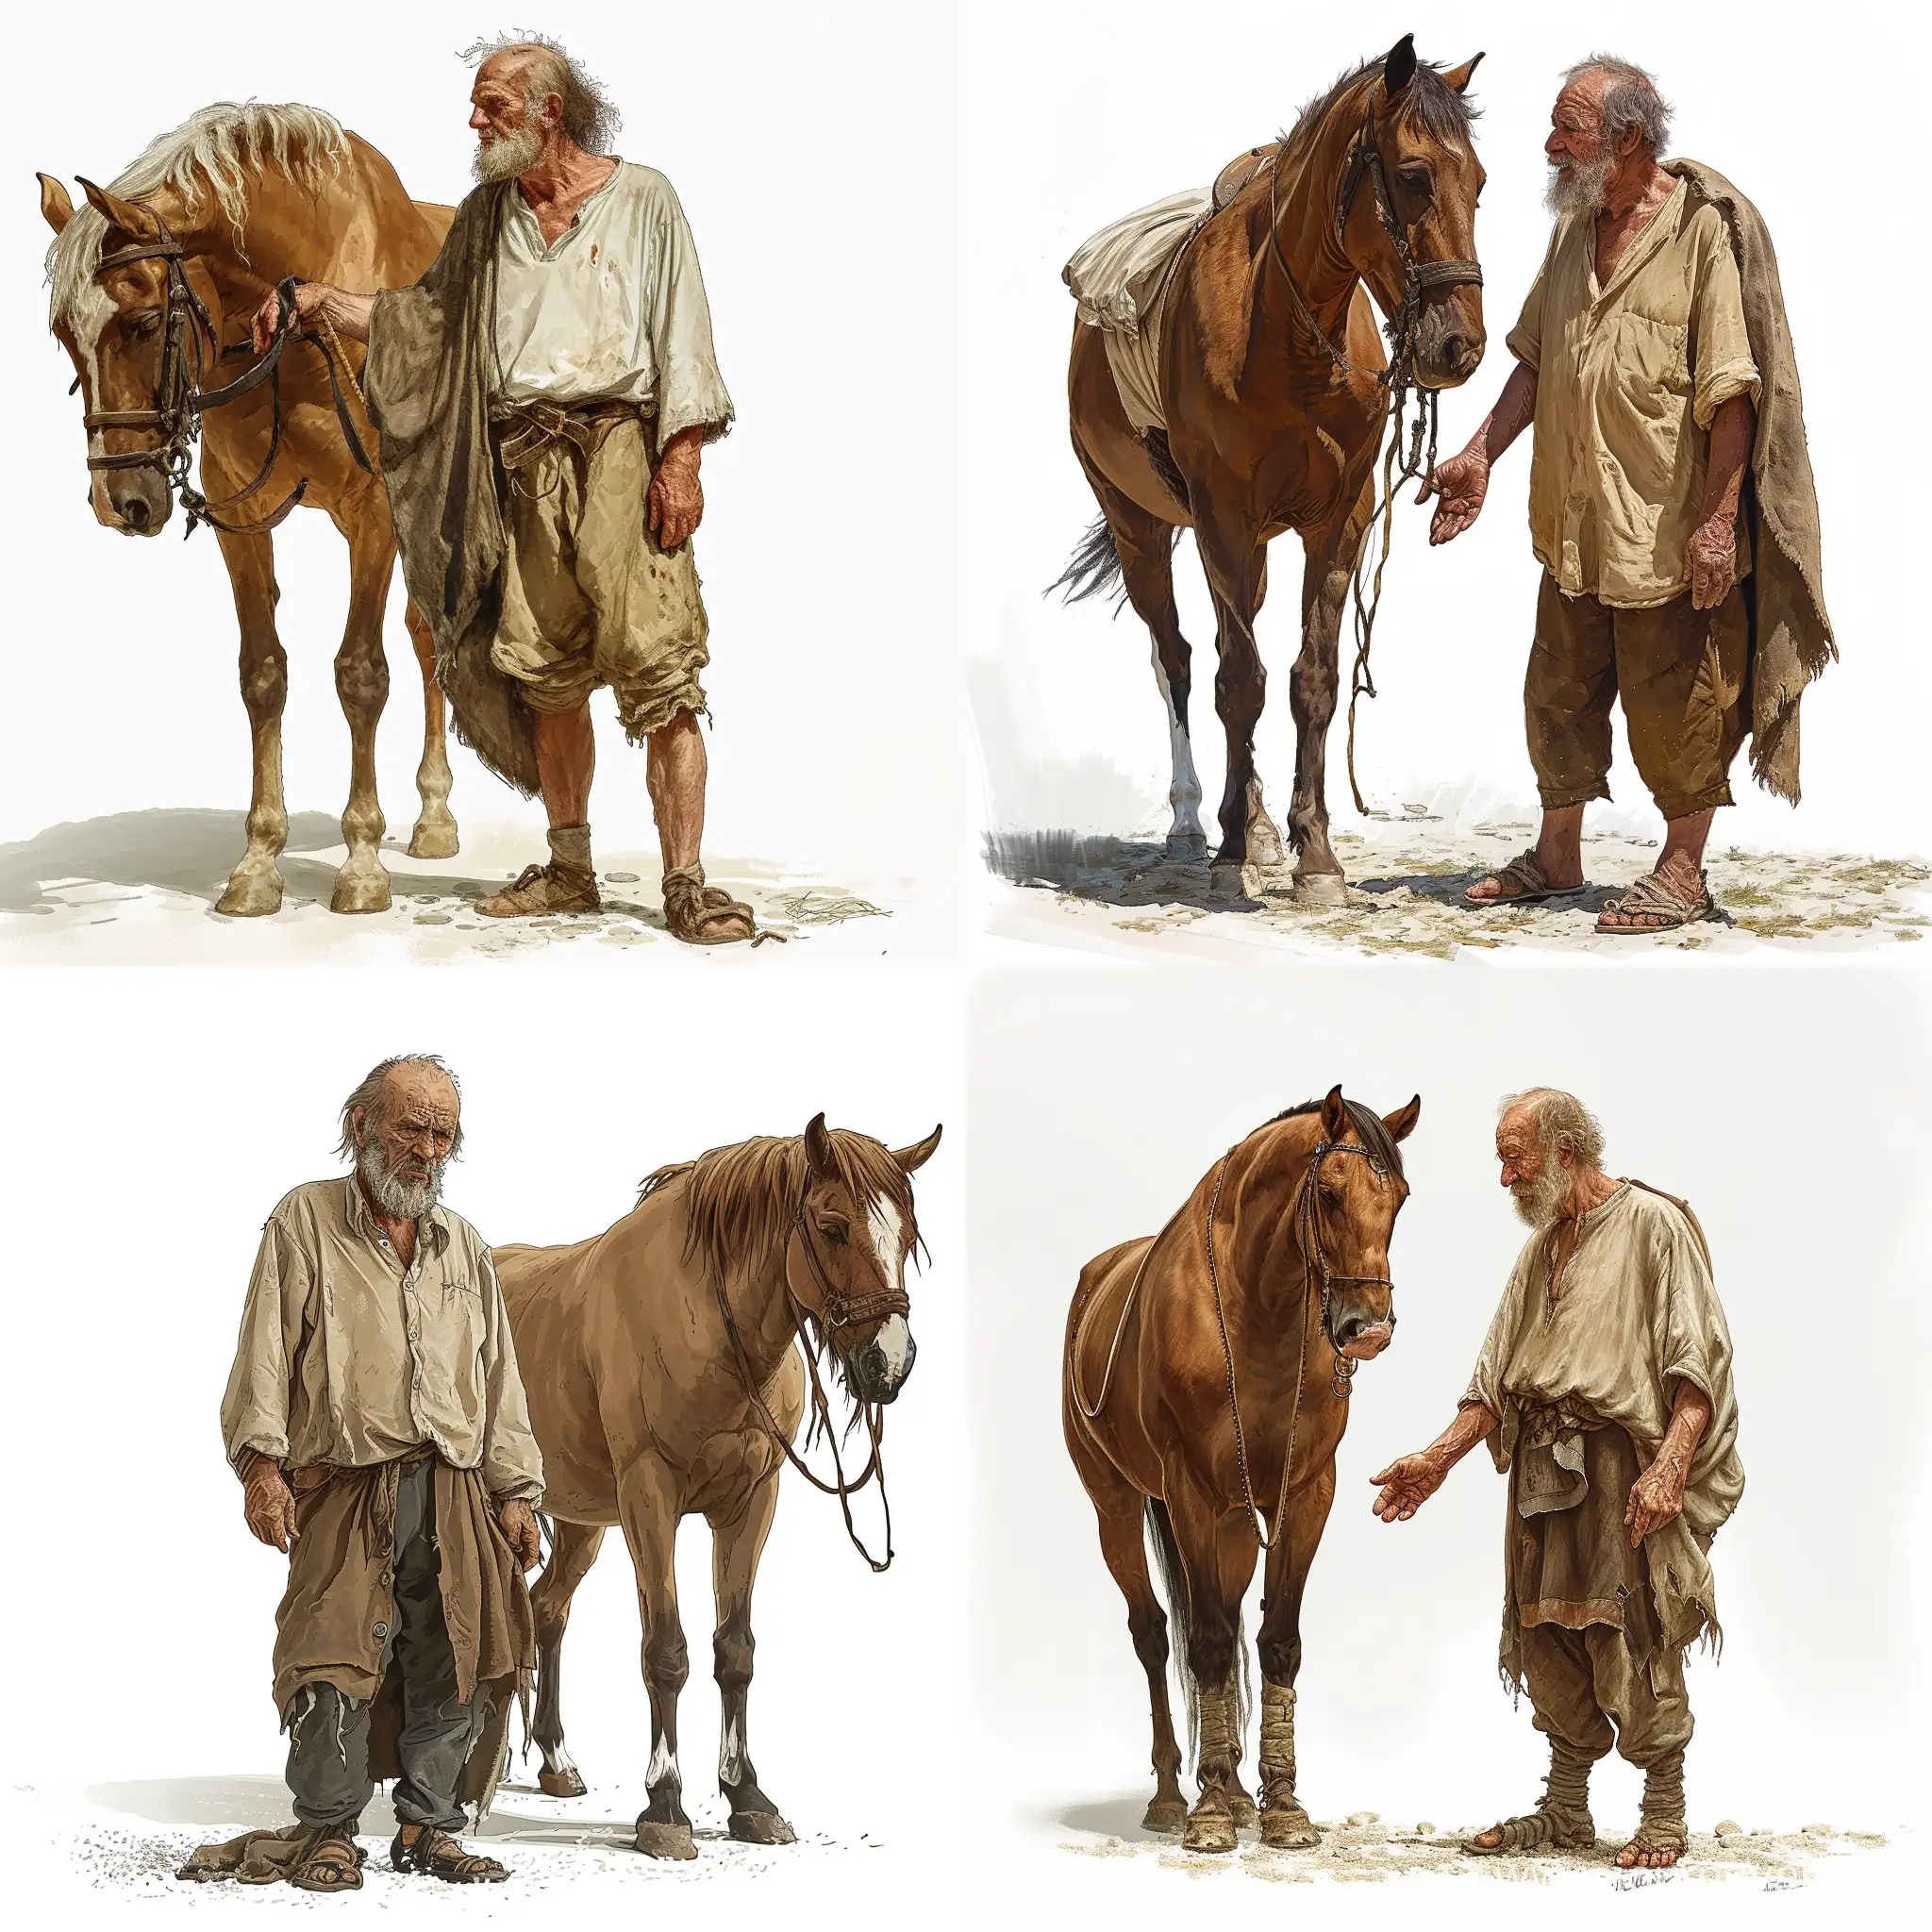 Elderly-Man-in-Ancient-Russian-Attire-Standing-Beside-Horse-Caricature-Style